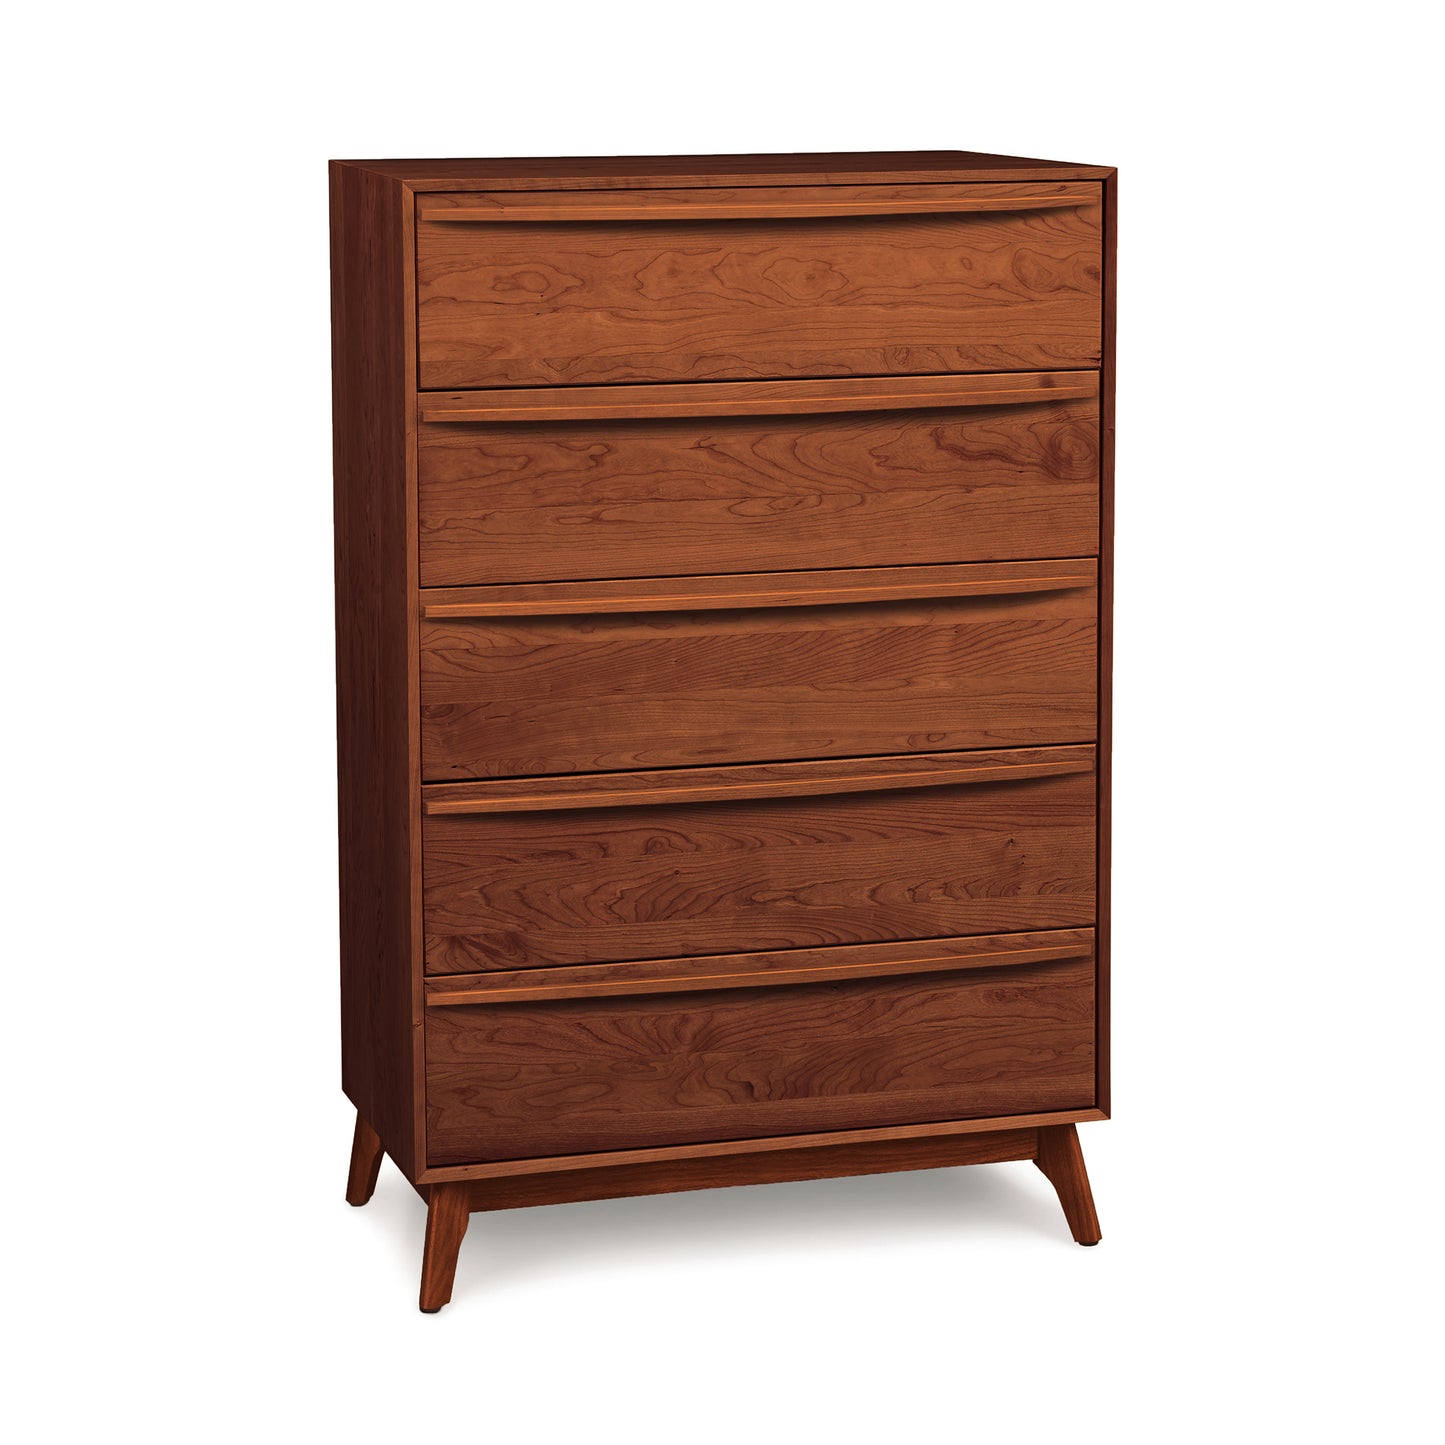 A Copeland Furniture Catalina 5-Drawer Wide Chest on a white background.